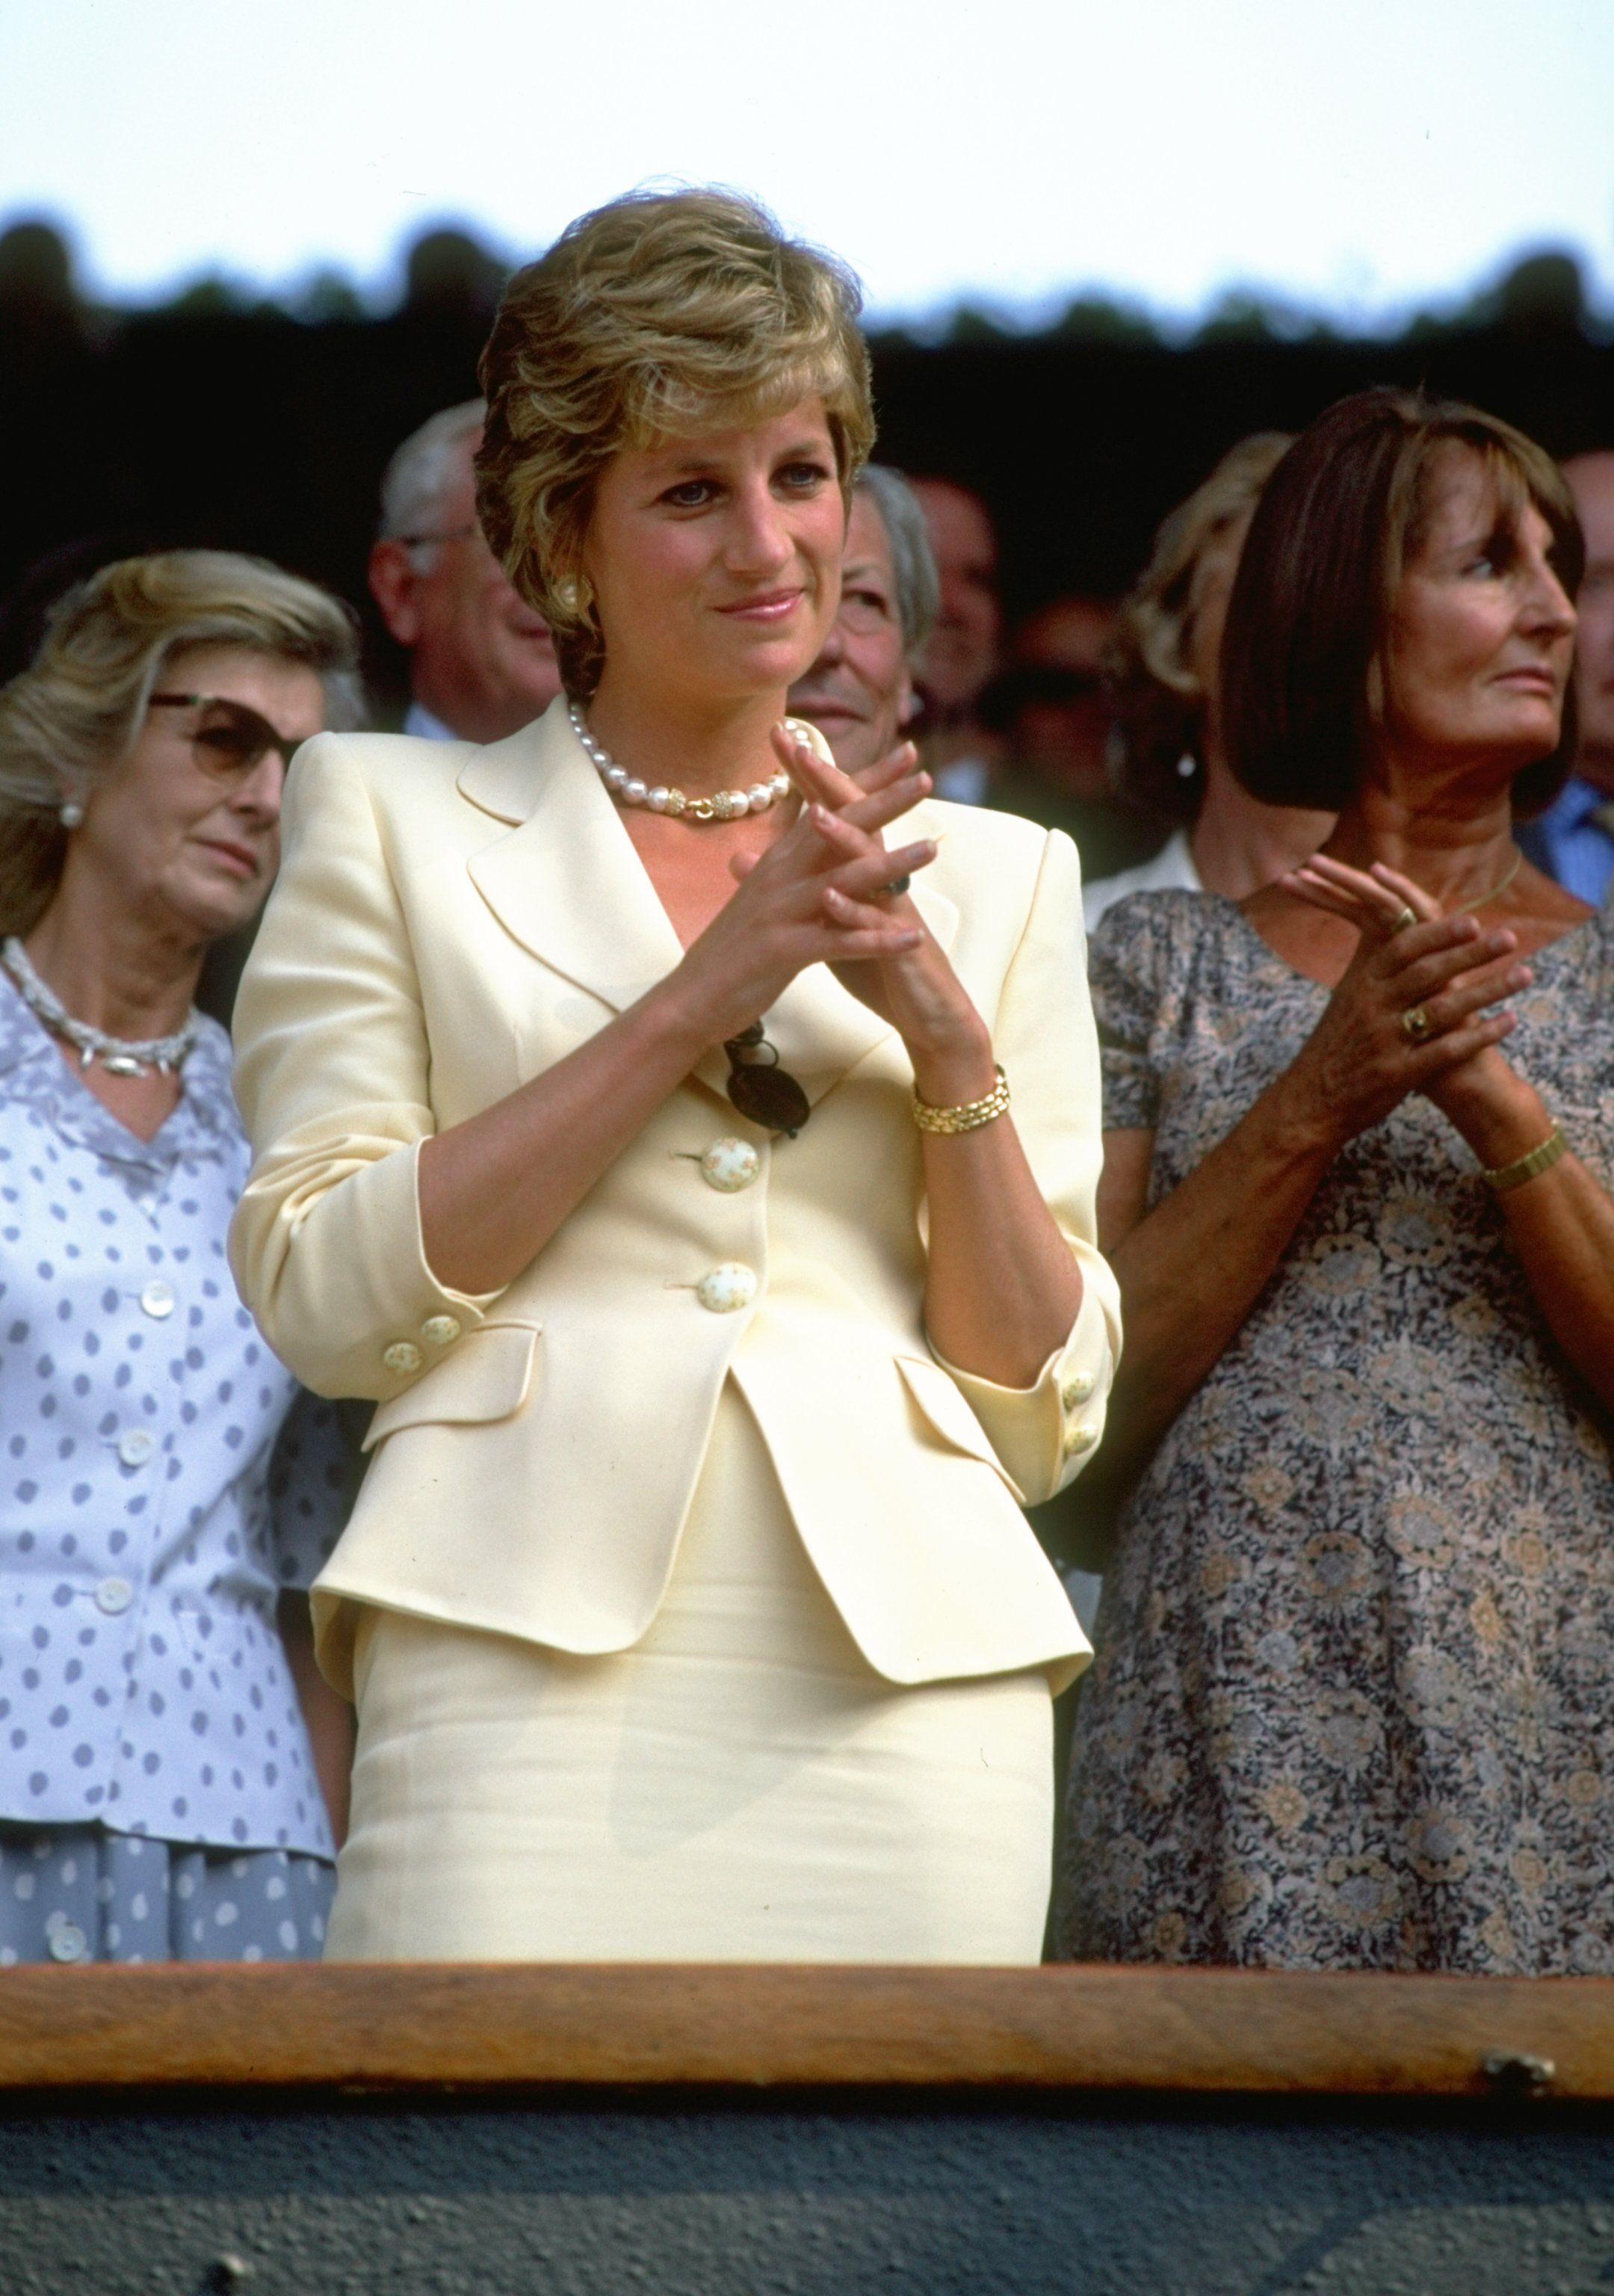 Diana, Princess of Wales at the Lawn Tennis Championships at Wimbledon in 1995 | Source: Getty Images